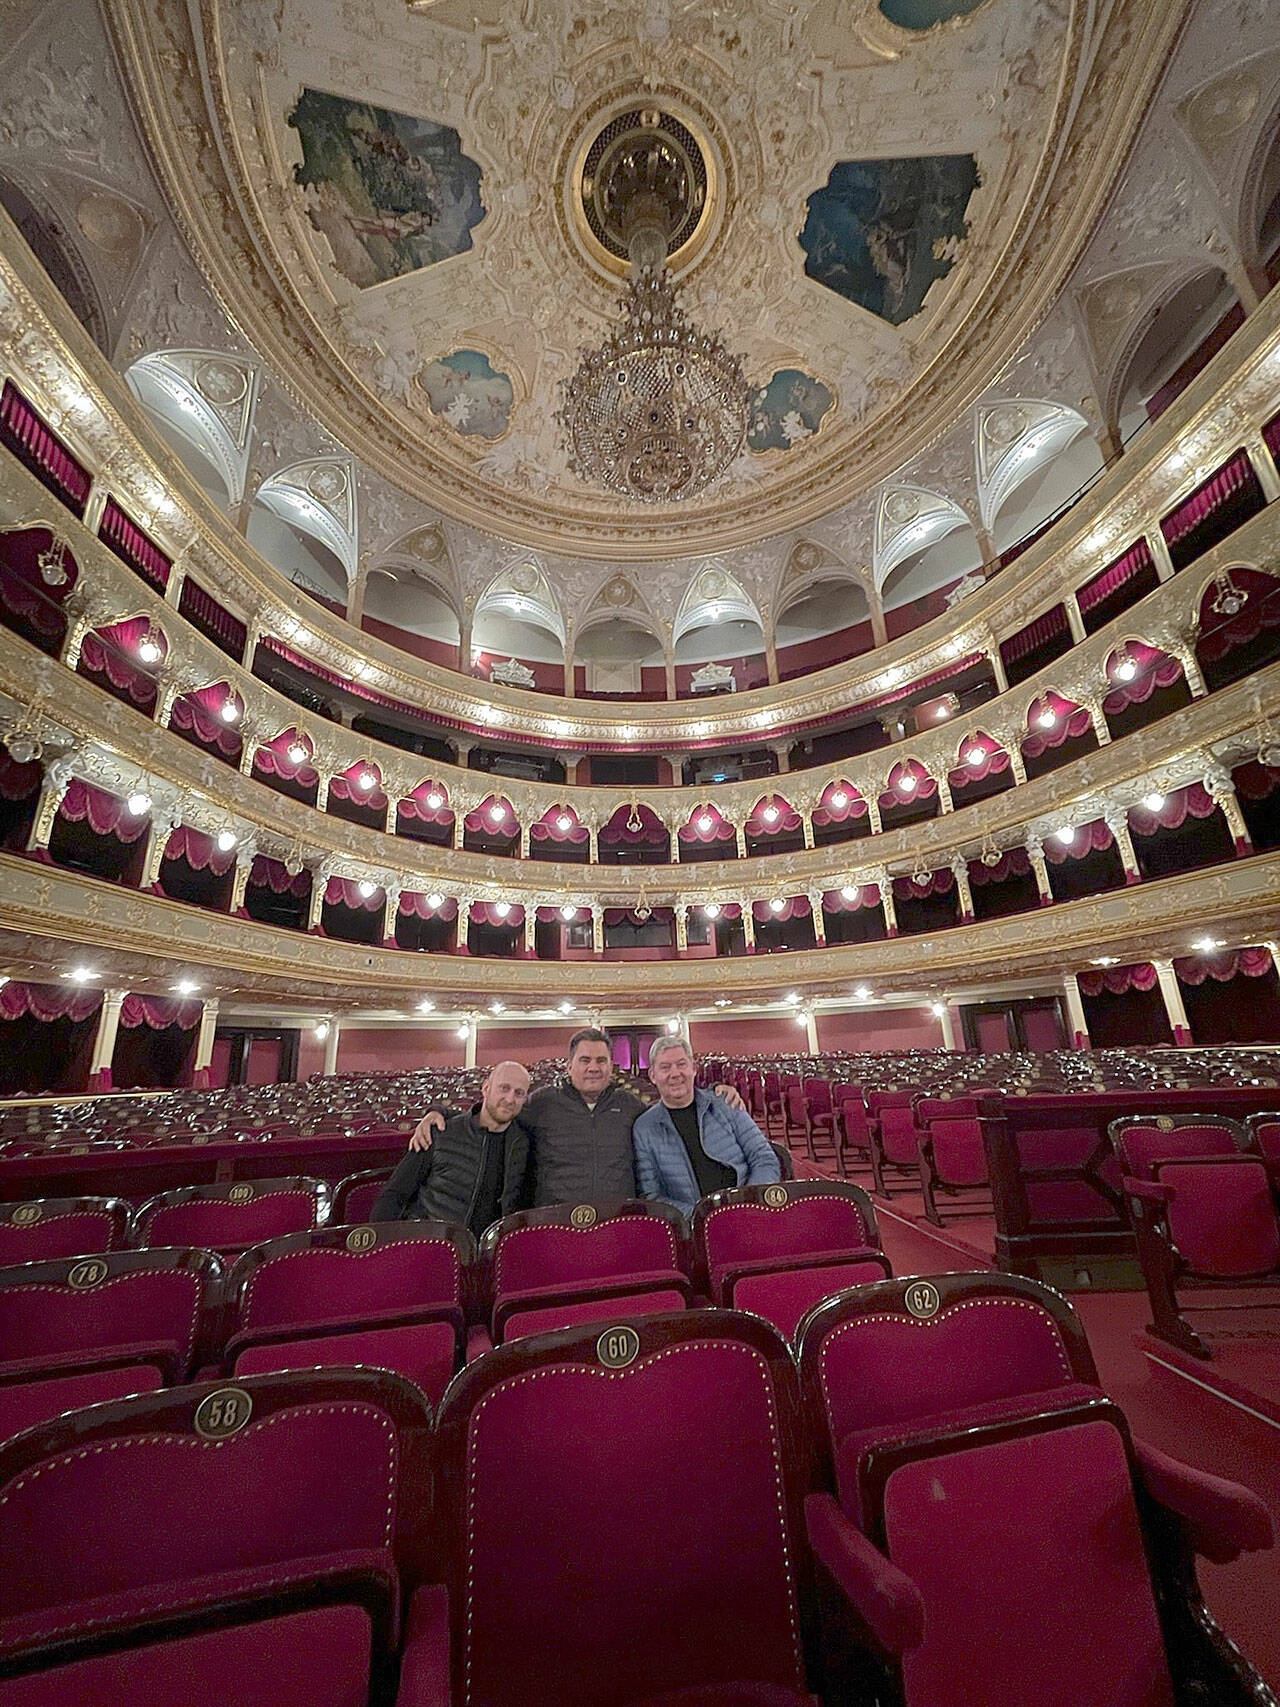 Odesa’s famed Opera House is considered the third finest in the world. (Courtesy photo)